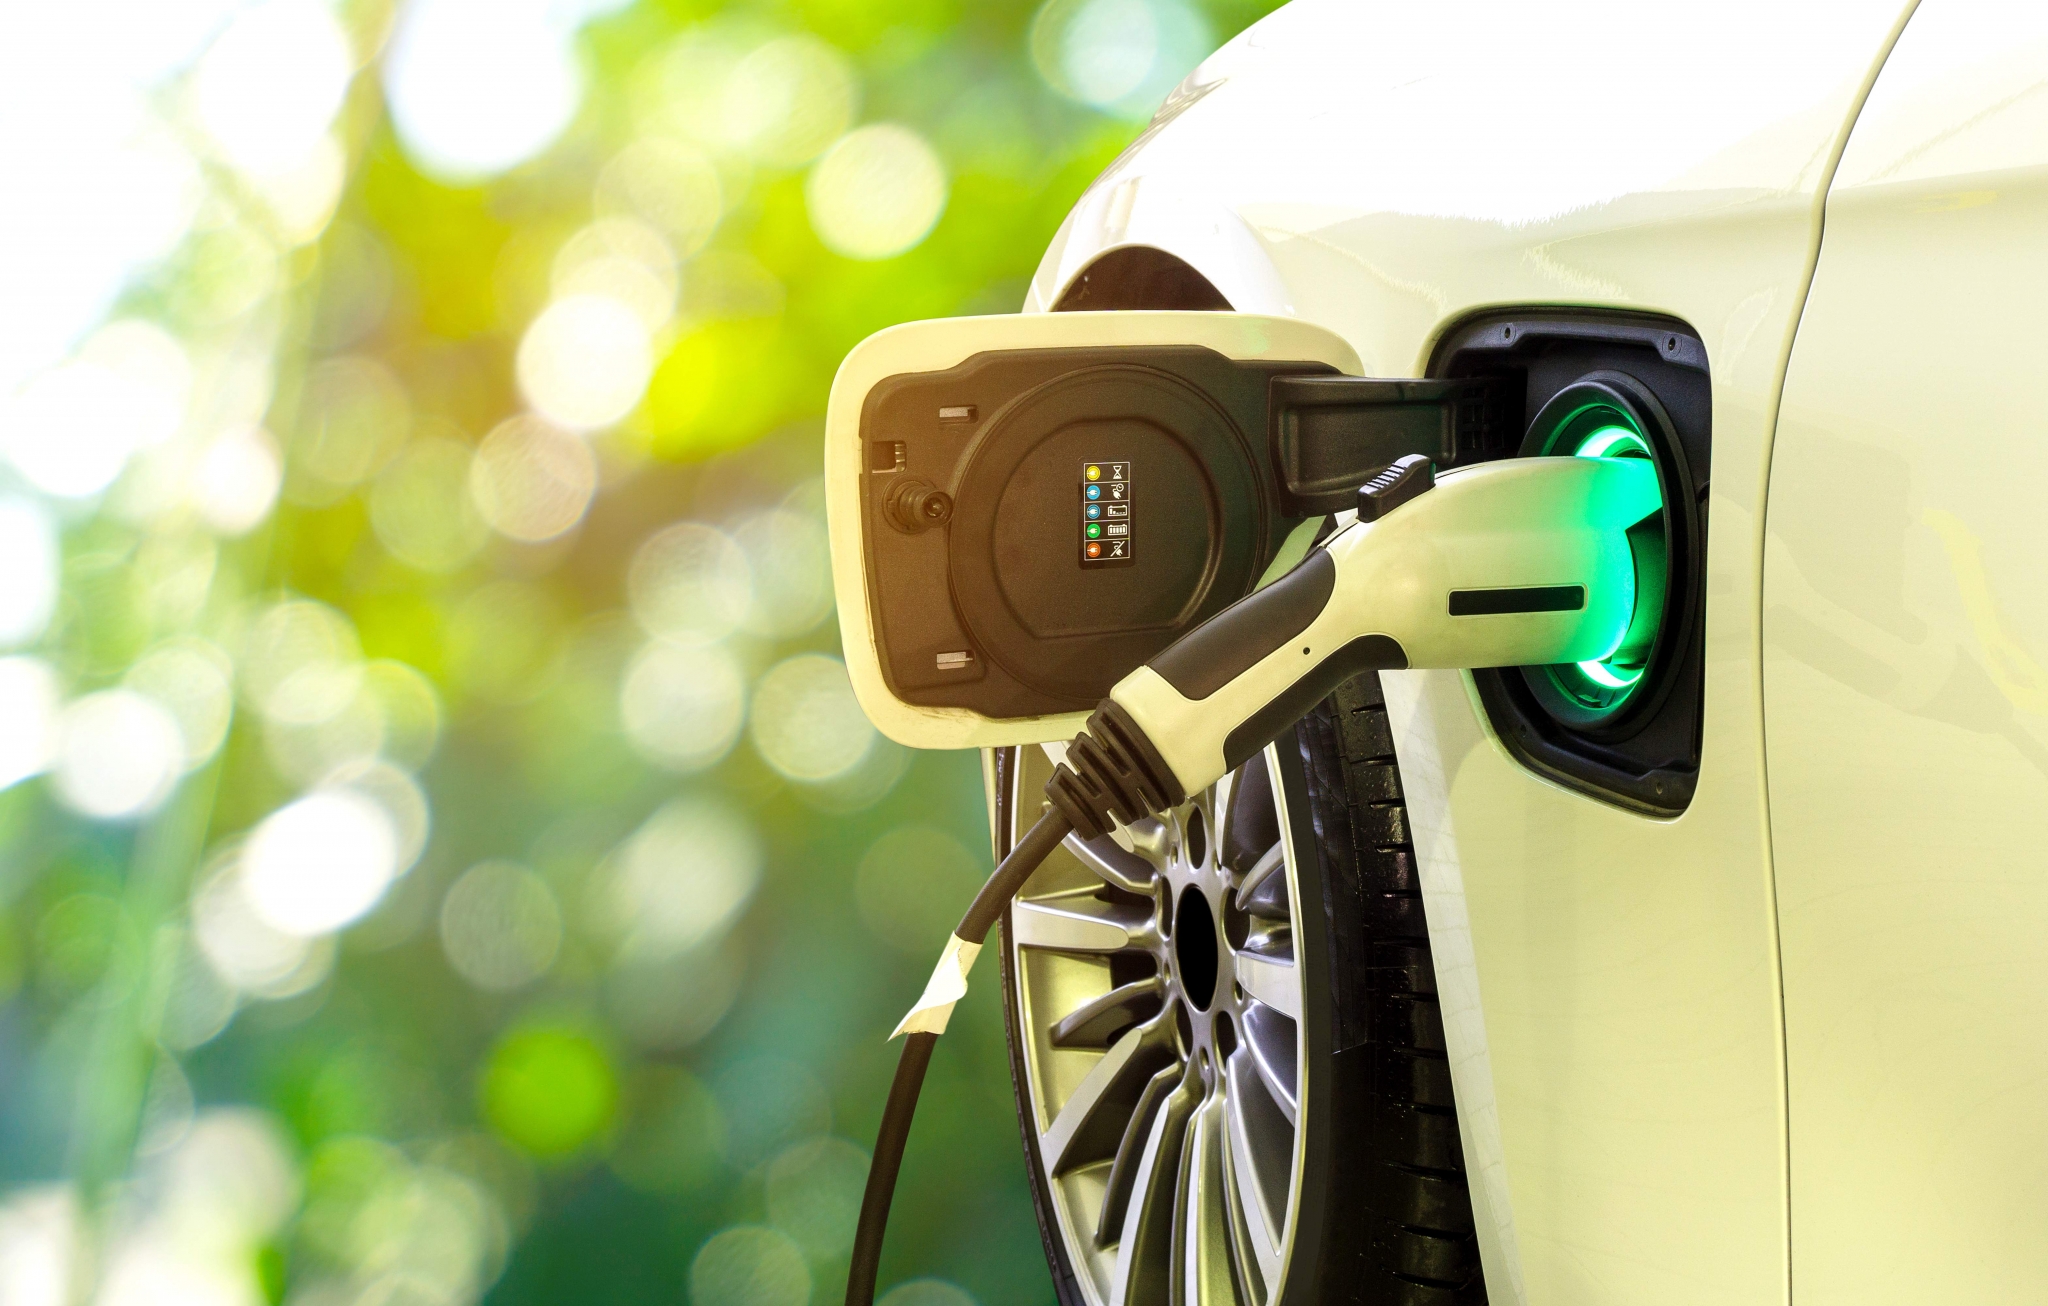 Electric Car Vs Hybrid Car Differences, Benefits & Buying Guide